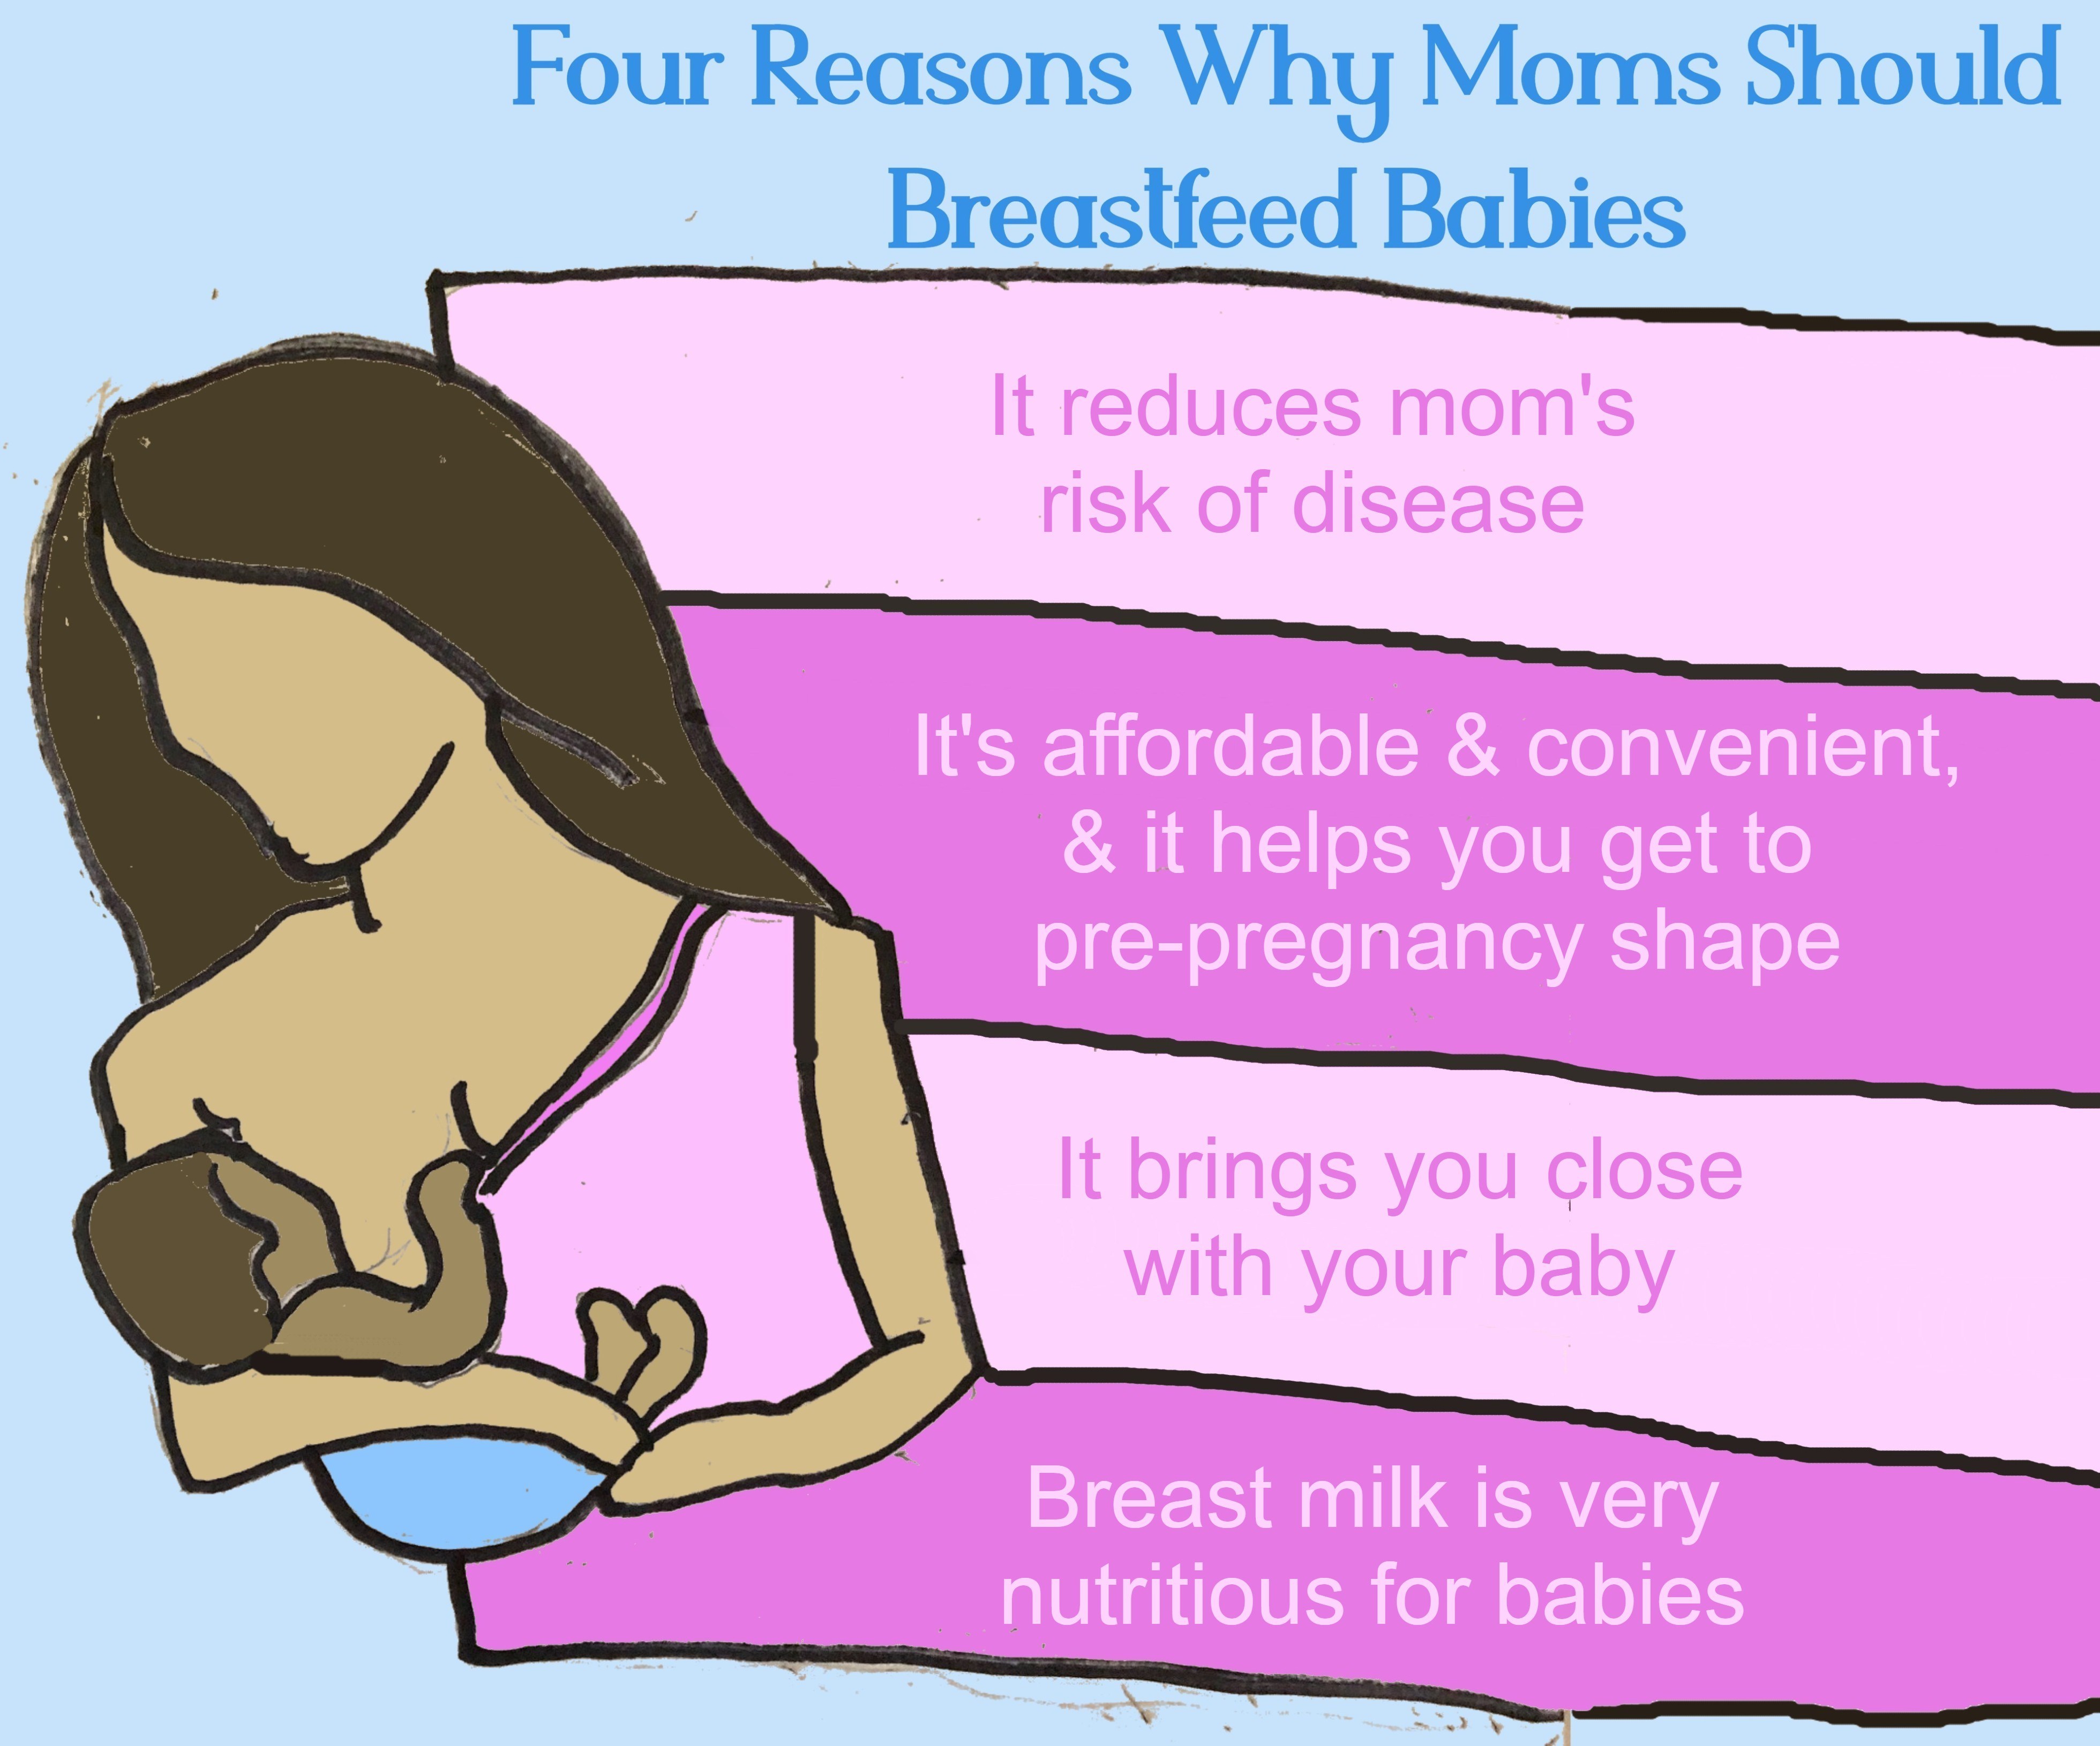 4 reasons why moms should breastfeed babies